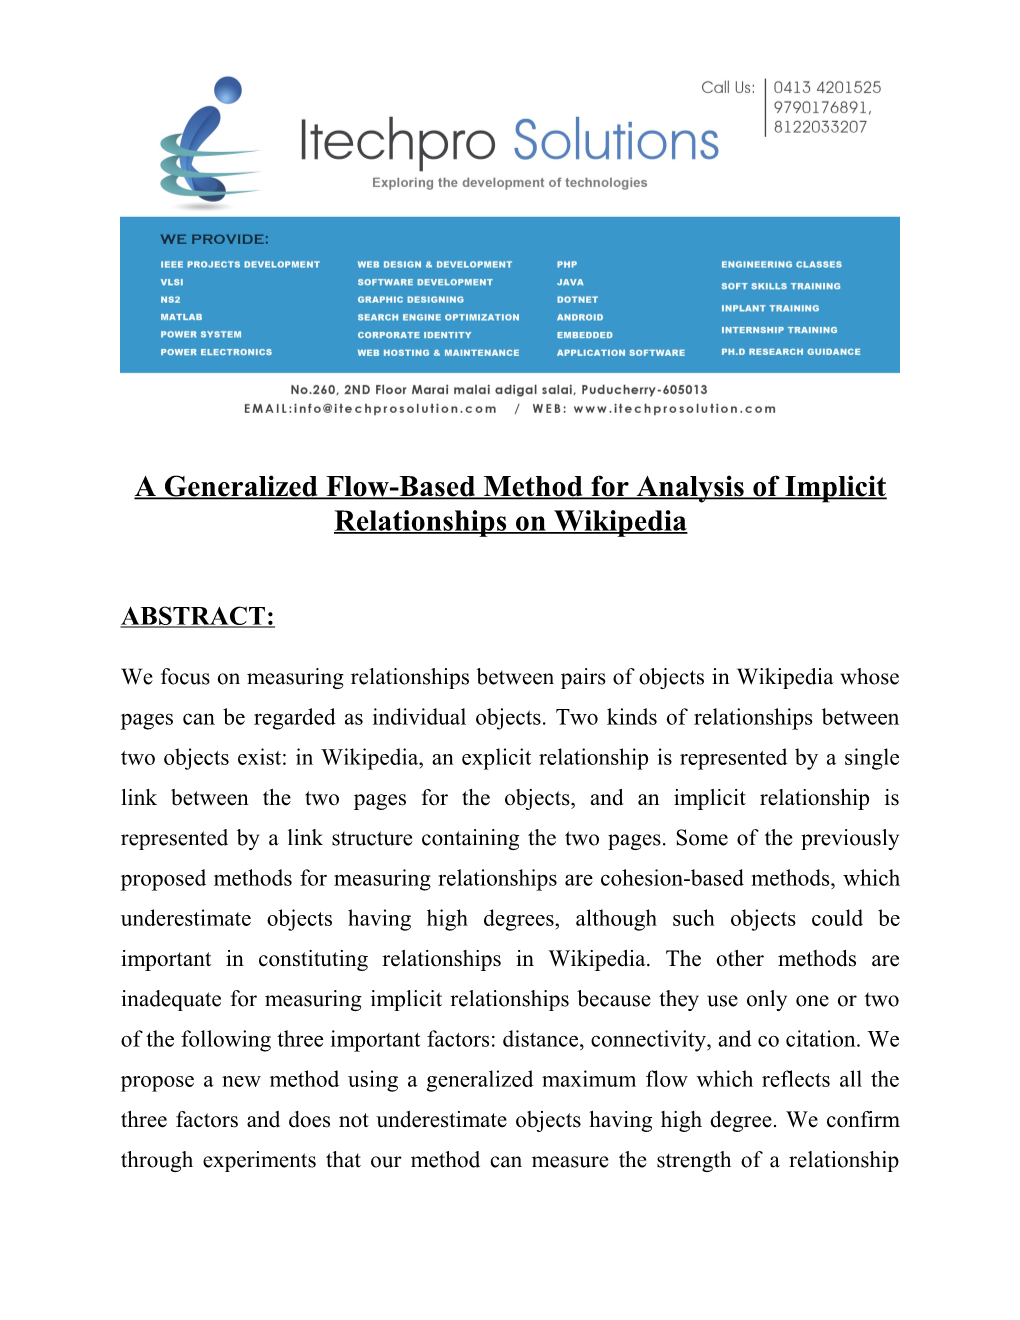 A Generalized Flow-Based Method for Analysis of Implicit Relationships on Wikipedia